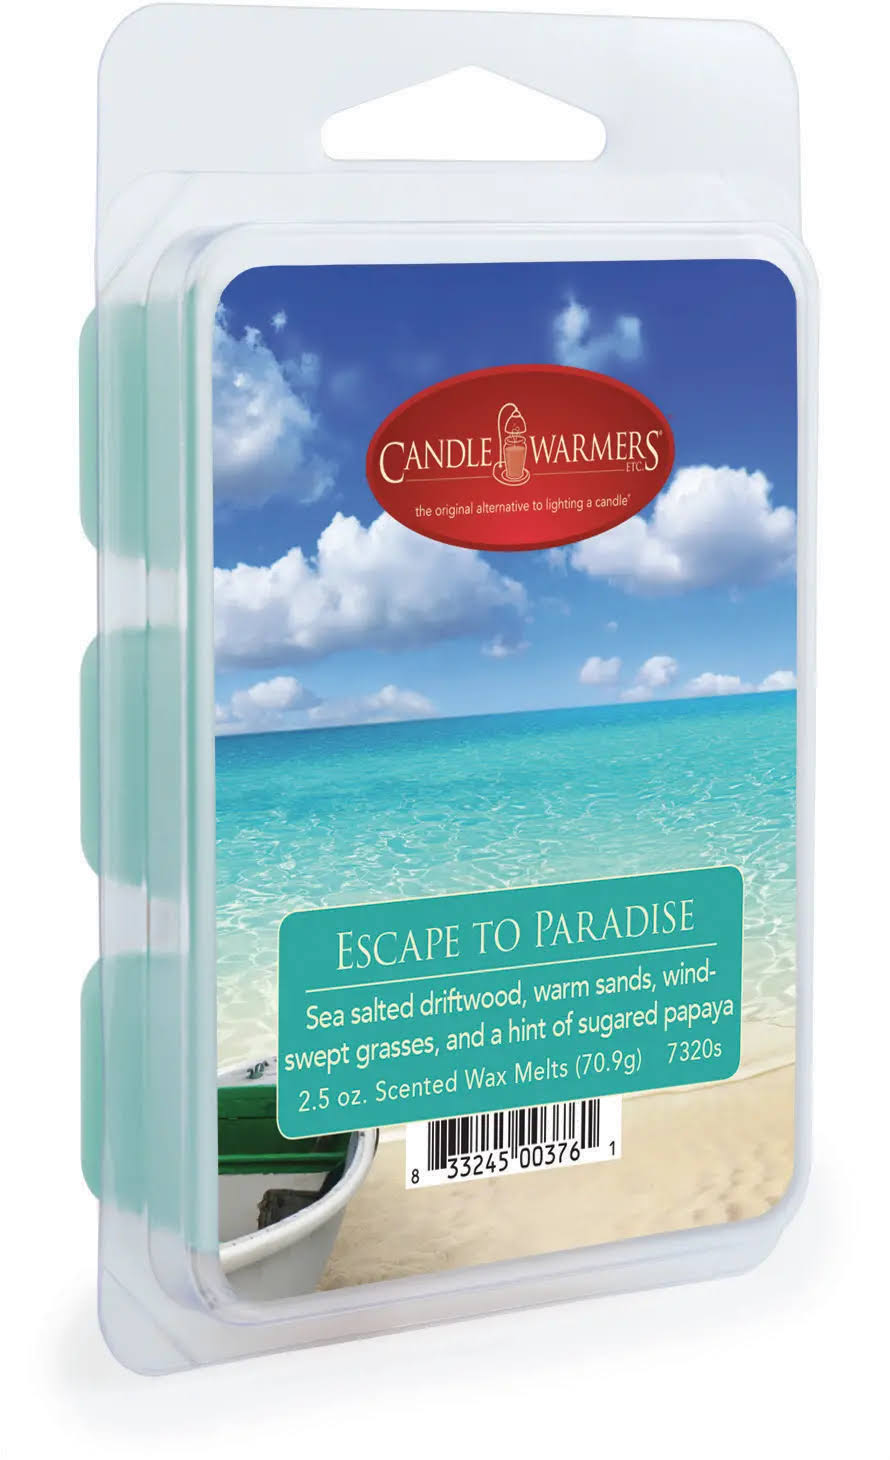 Candle Warmers Escape to Paradise Wax Melts - 2.5 Ounces